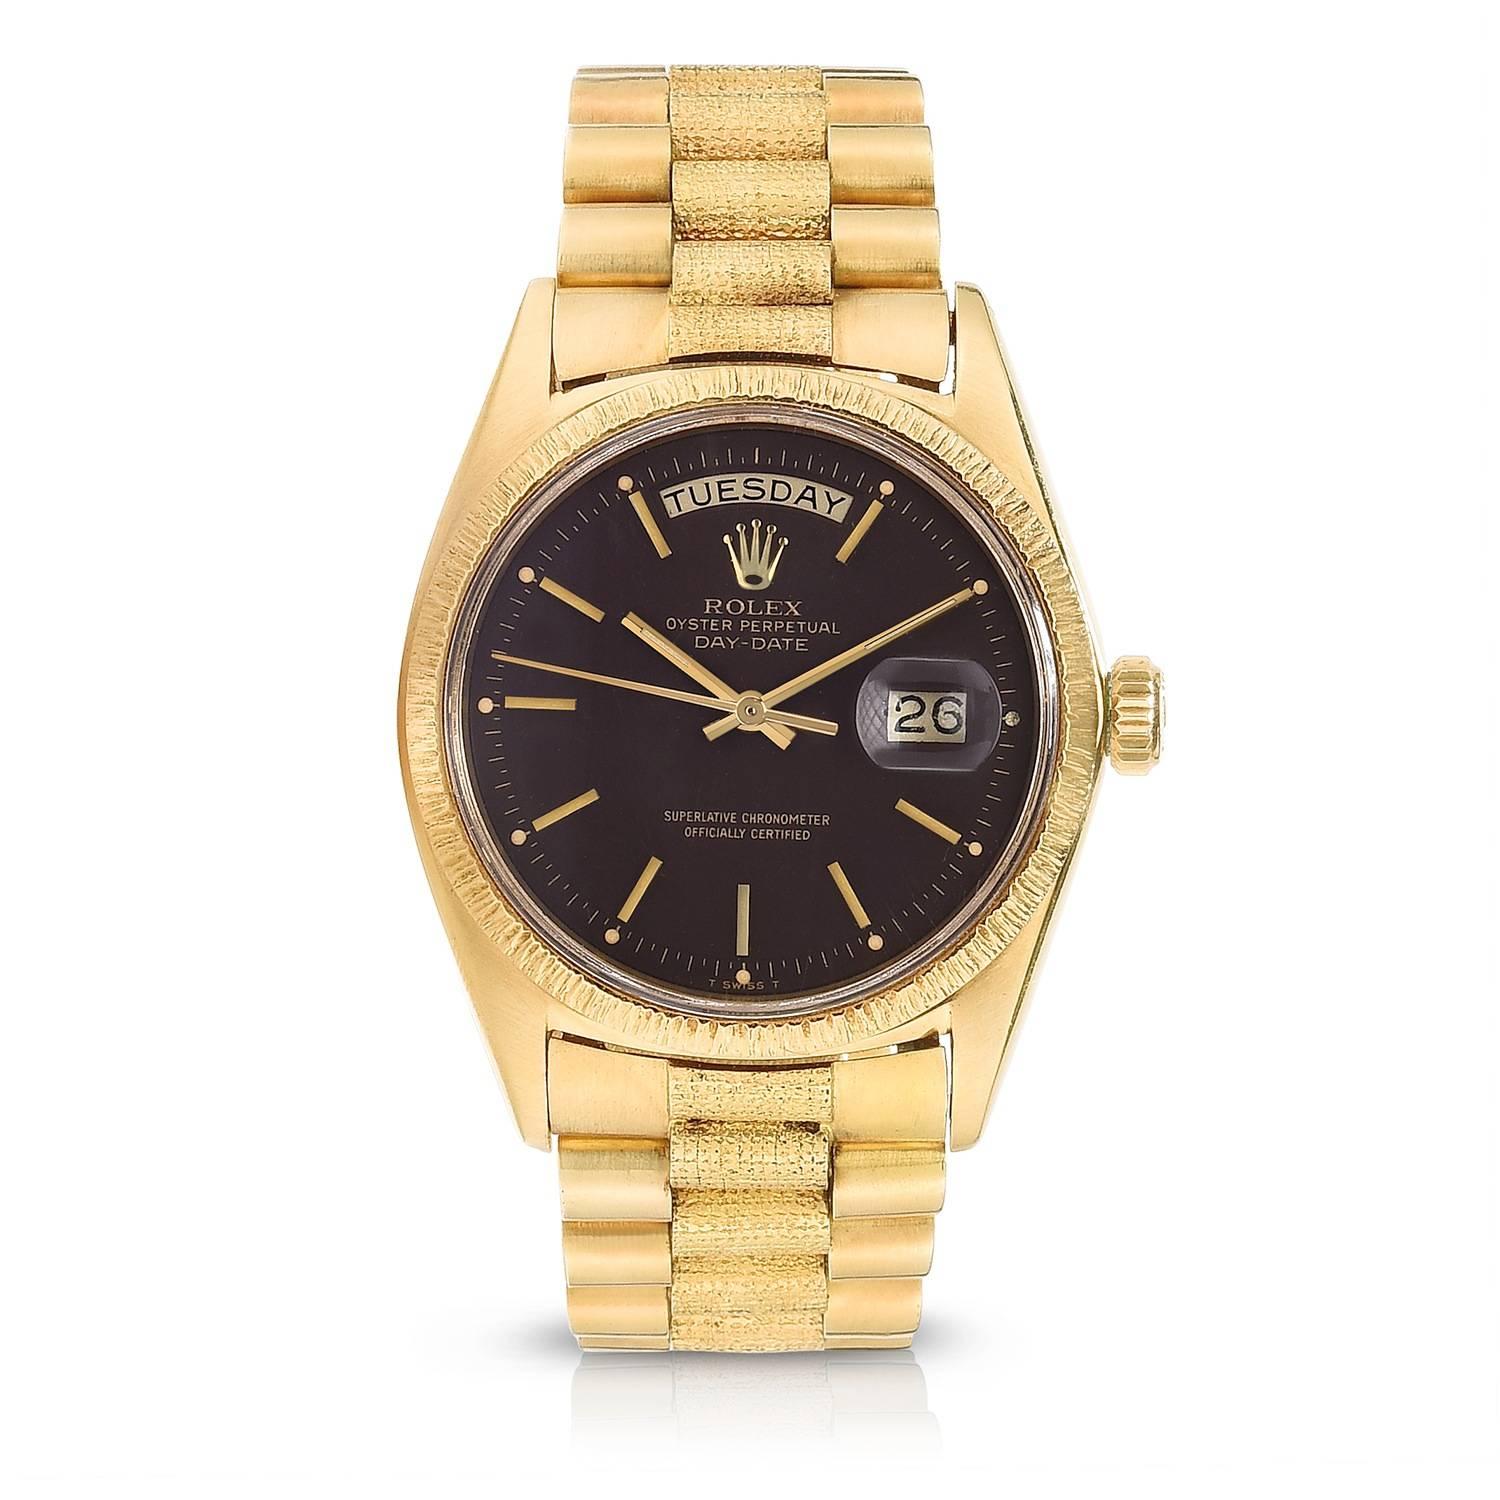 Rolex 18K Yellow Gold Oyster Perpetual Day-Date Presidential Wristwatch
Factory Brown Matte Dial
Rare Reference 1807 with Factory Finish
18K Yellow Gold Bezel with Bark Finish
36MM in Size 
Rolex Calibre Base 1500 Automatic Movement
Acrylic